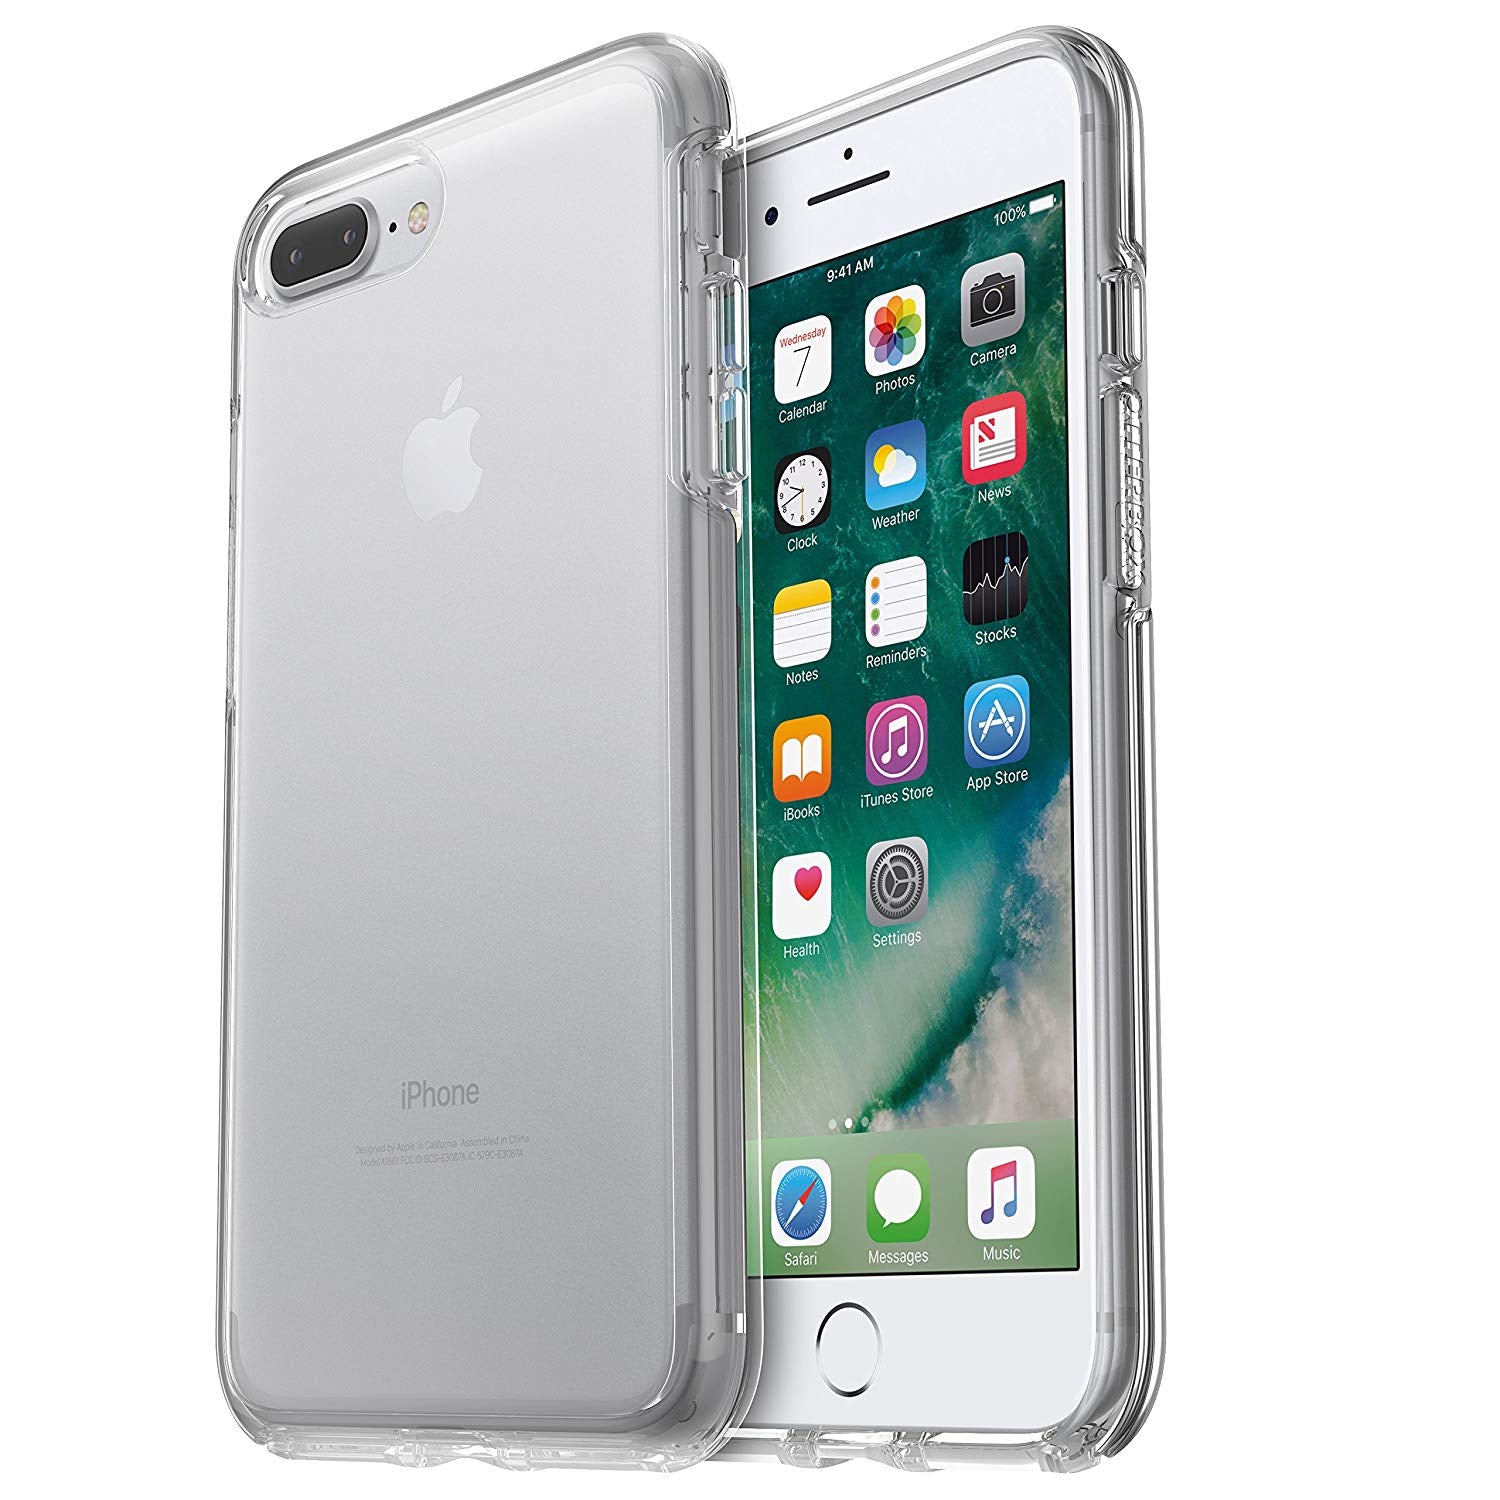 OtterBox SYMMETRY SERIES Case for iPhone 7 Plus / iPhone 8 Plus - Clear (Certified Refurbished)